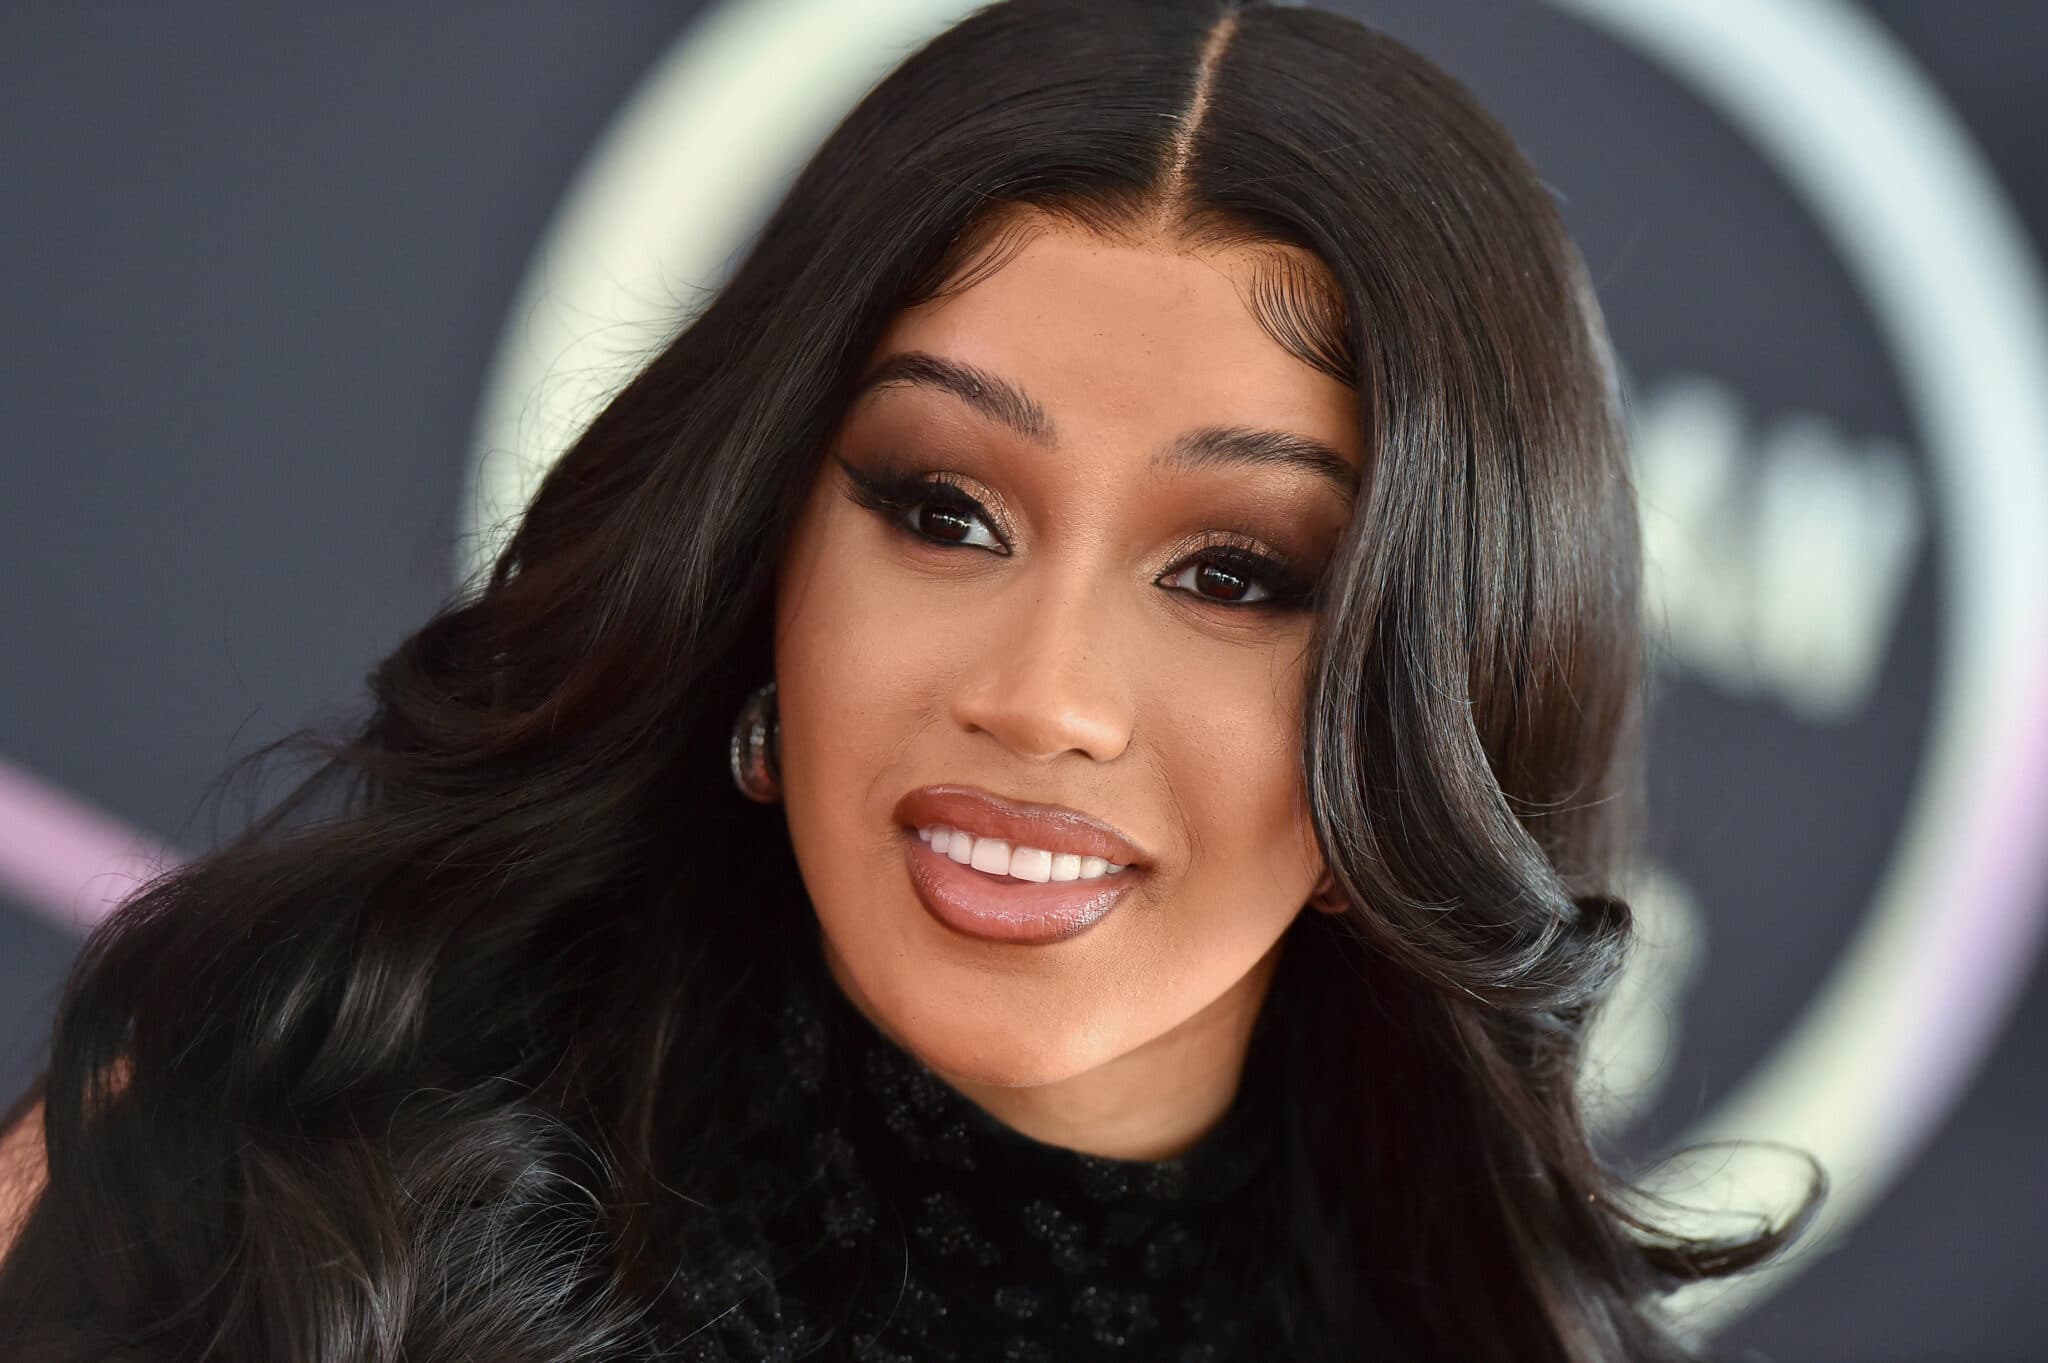 Cardi B announces split from Offset months after welcoming daughter